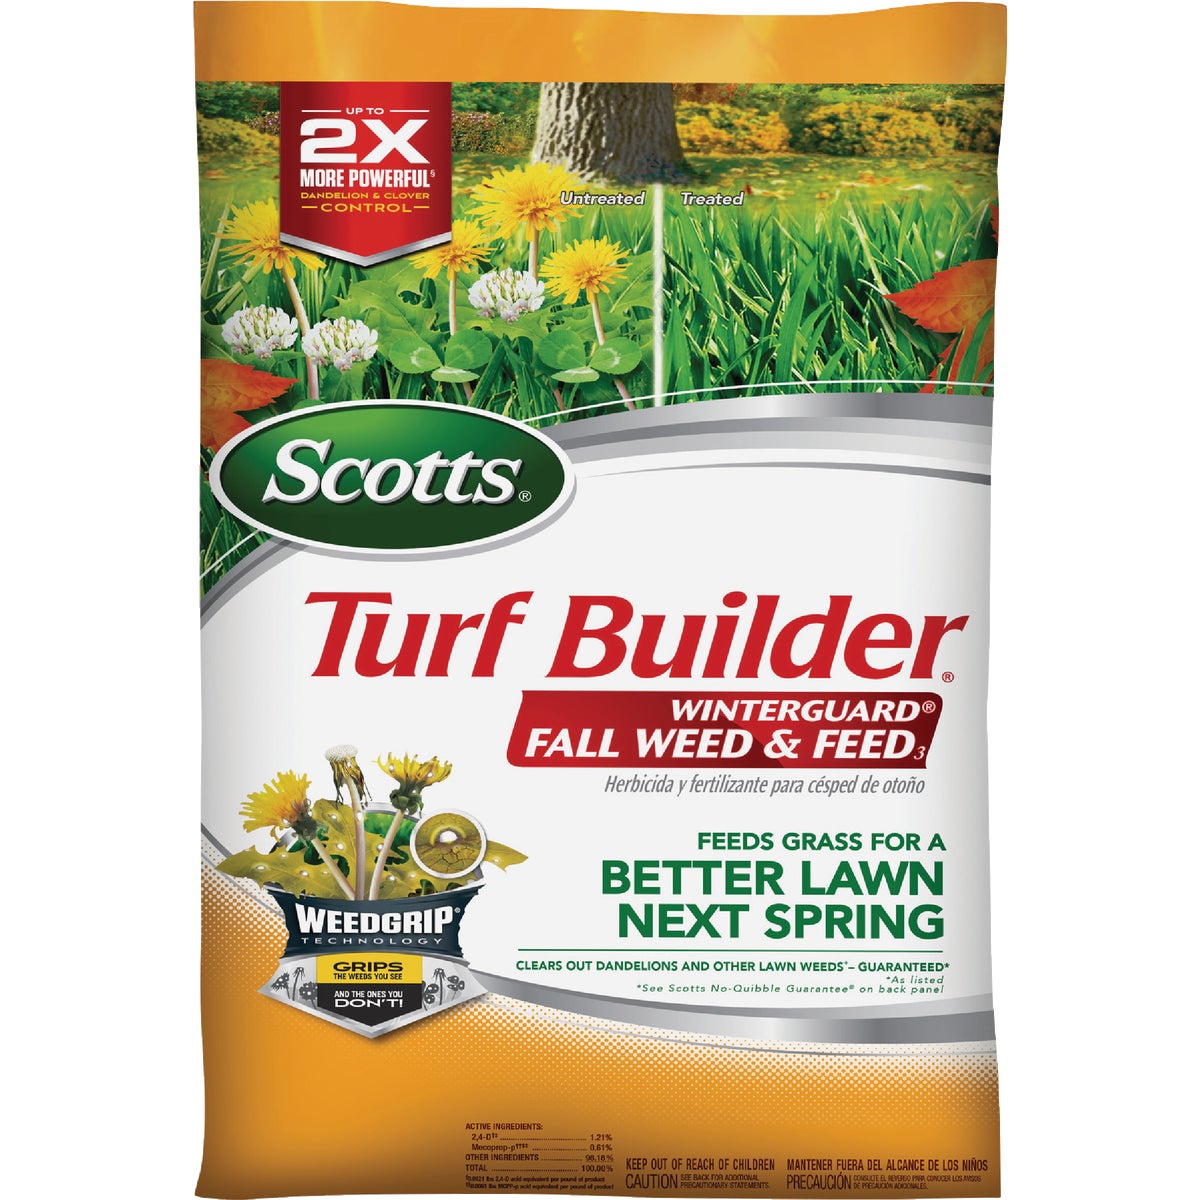 Scotts Turf Builder WinterGuard Weed & Feed 11.43 Lb. 4000 Sq. Ft. Fall Weed Killer and Lawn Fertilizer 